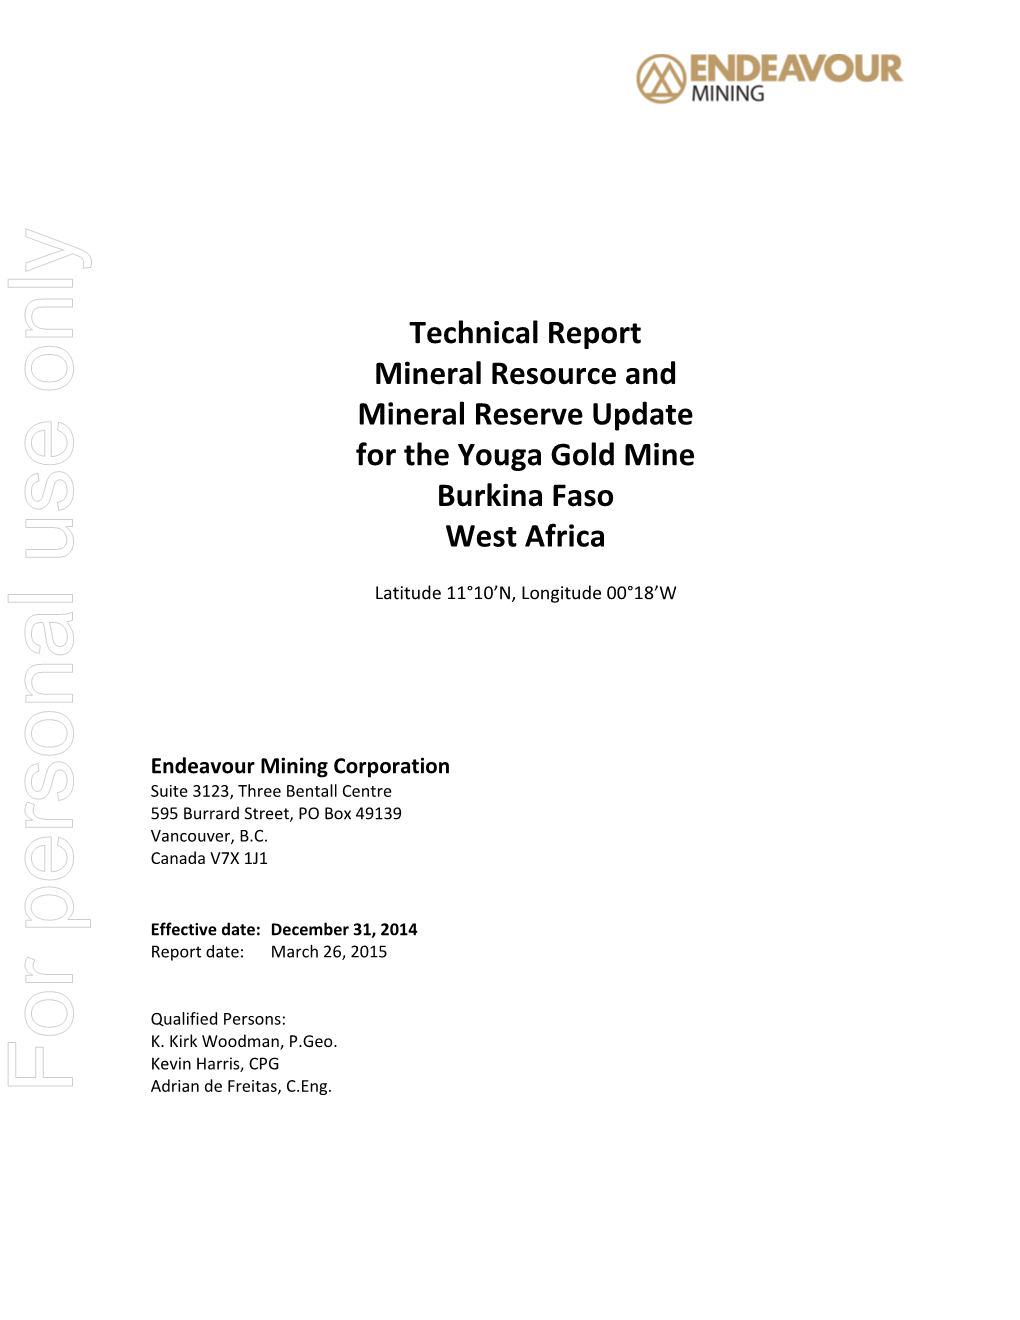 Technical Report on Youga Gold Mine